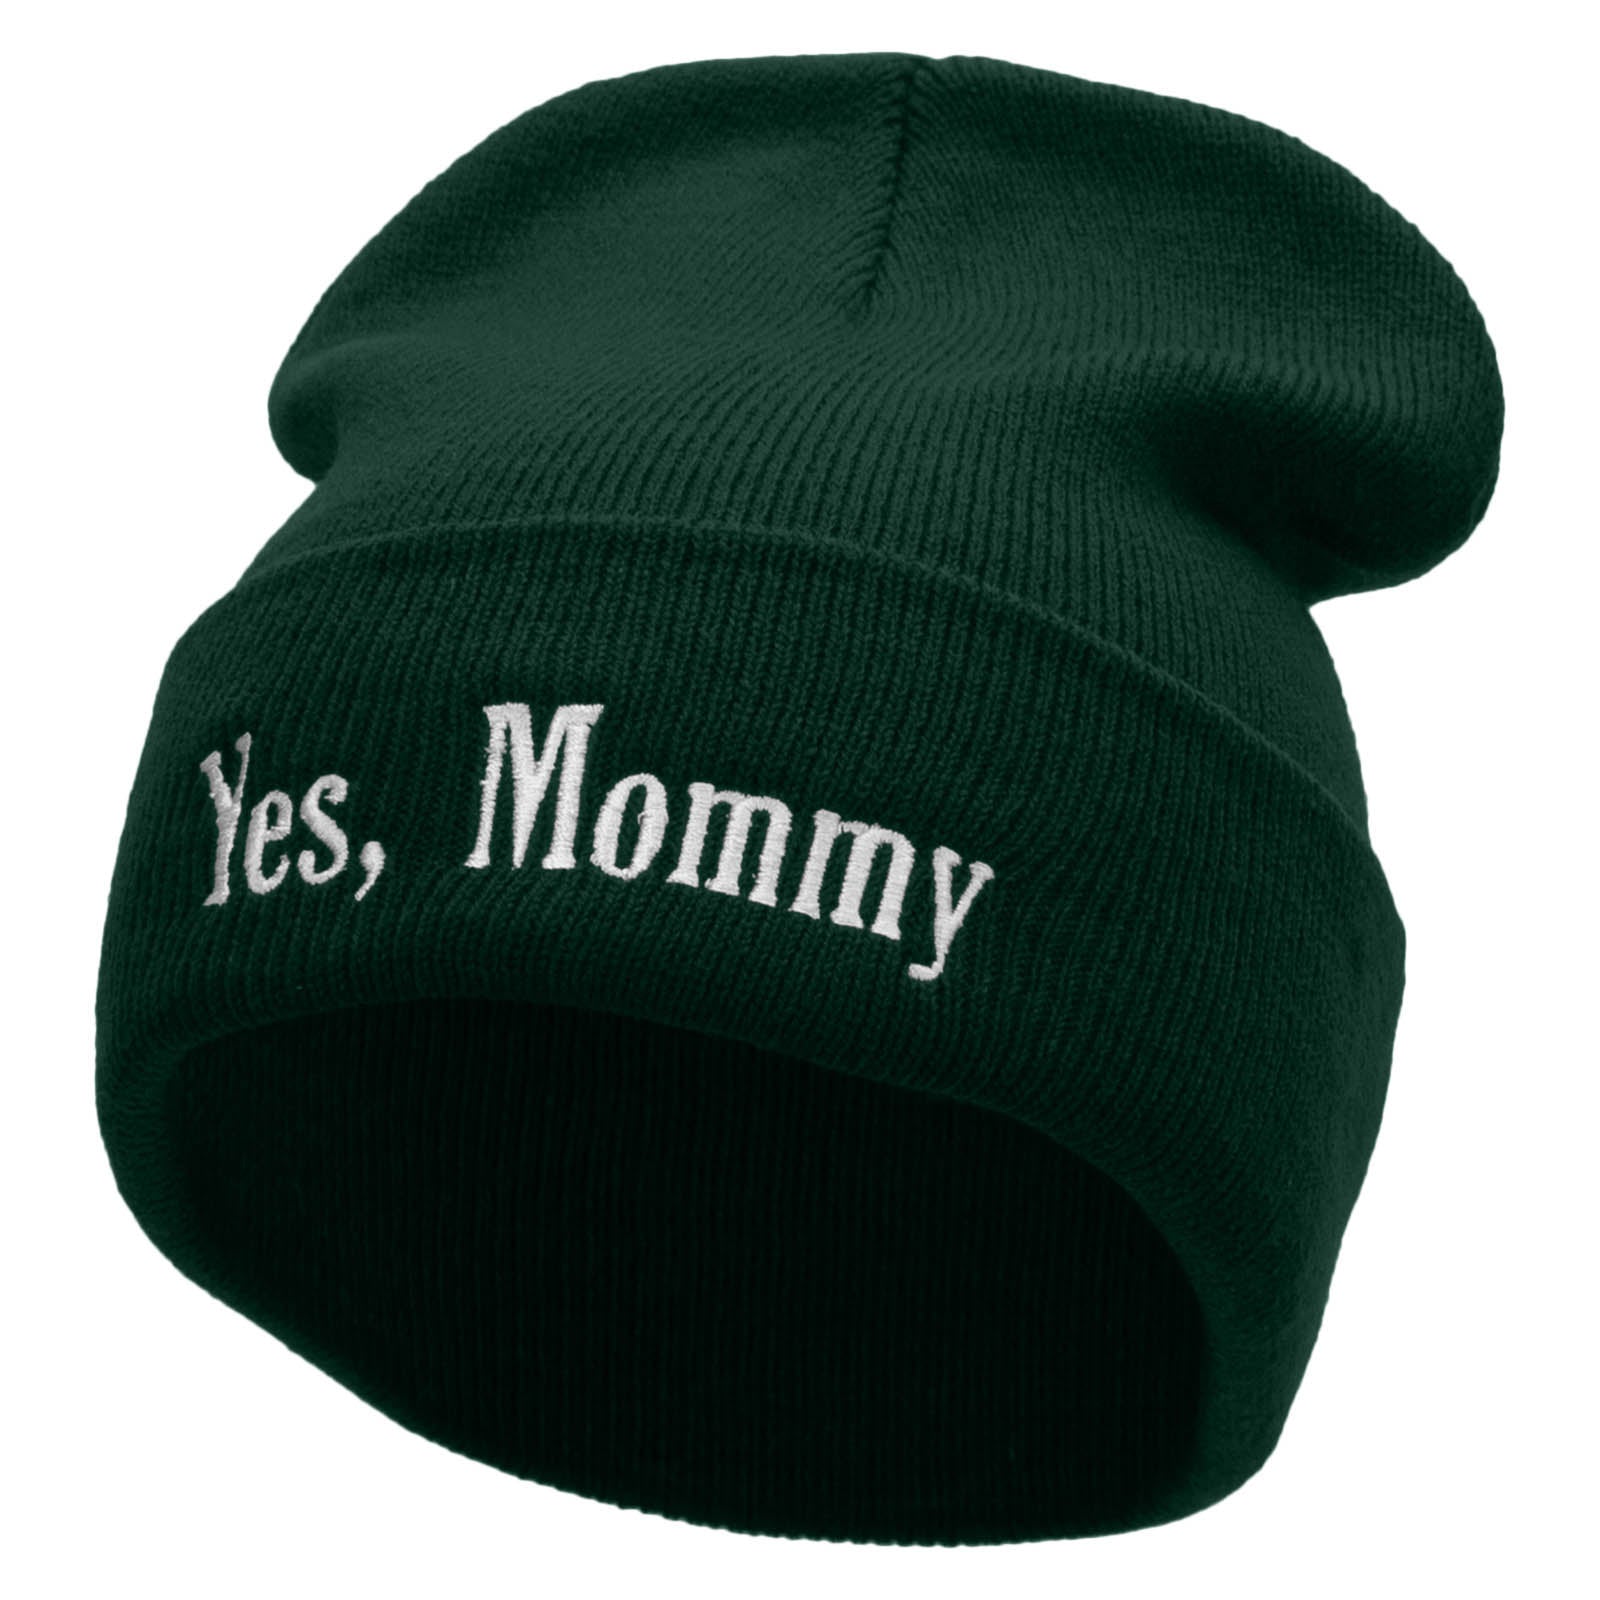 Yes, Mommy Embroidered 12 Inch Long Knitted Beanie - Dk Green OSFM